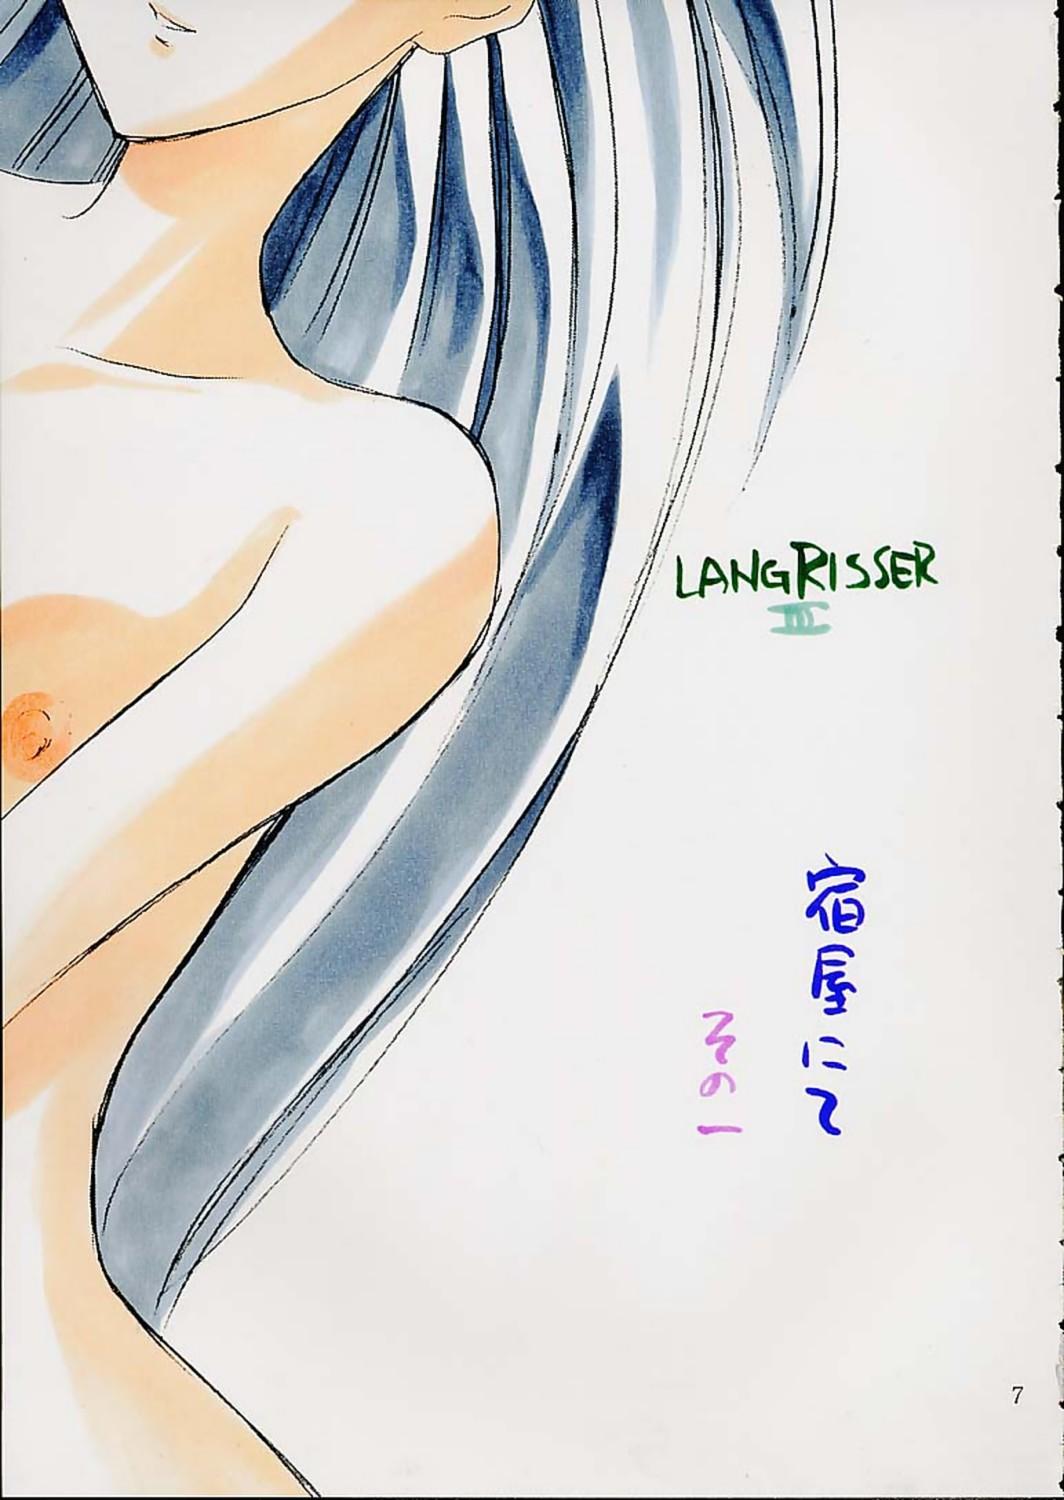 Real Amateur Porn WHAT IS LOVE - Langrisser Perrito - Page 5